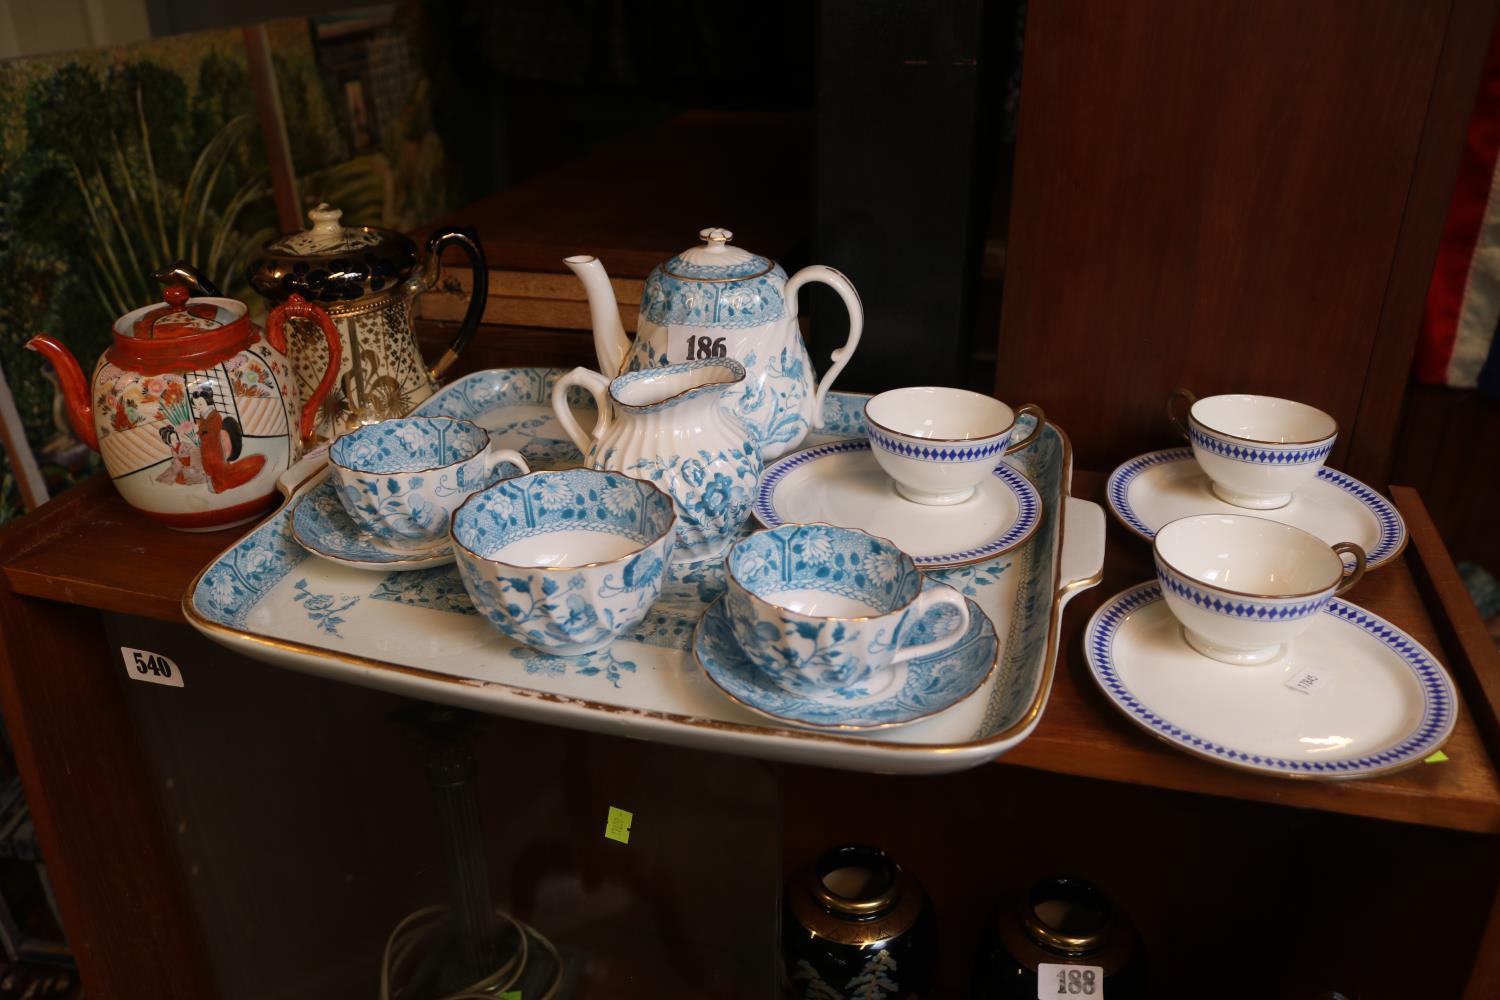 19thC Transfer printed Copeland Tete e Tete with 3 Royal Doulton TV Cups and saucers and 2 Teapots